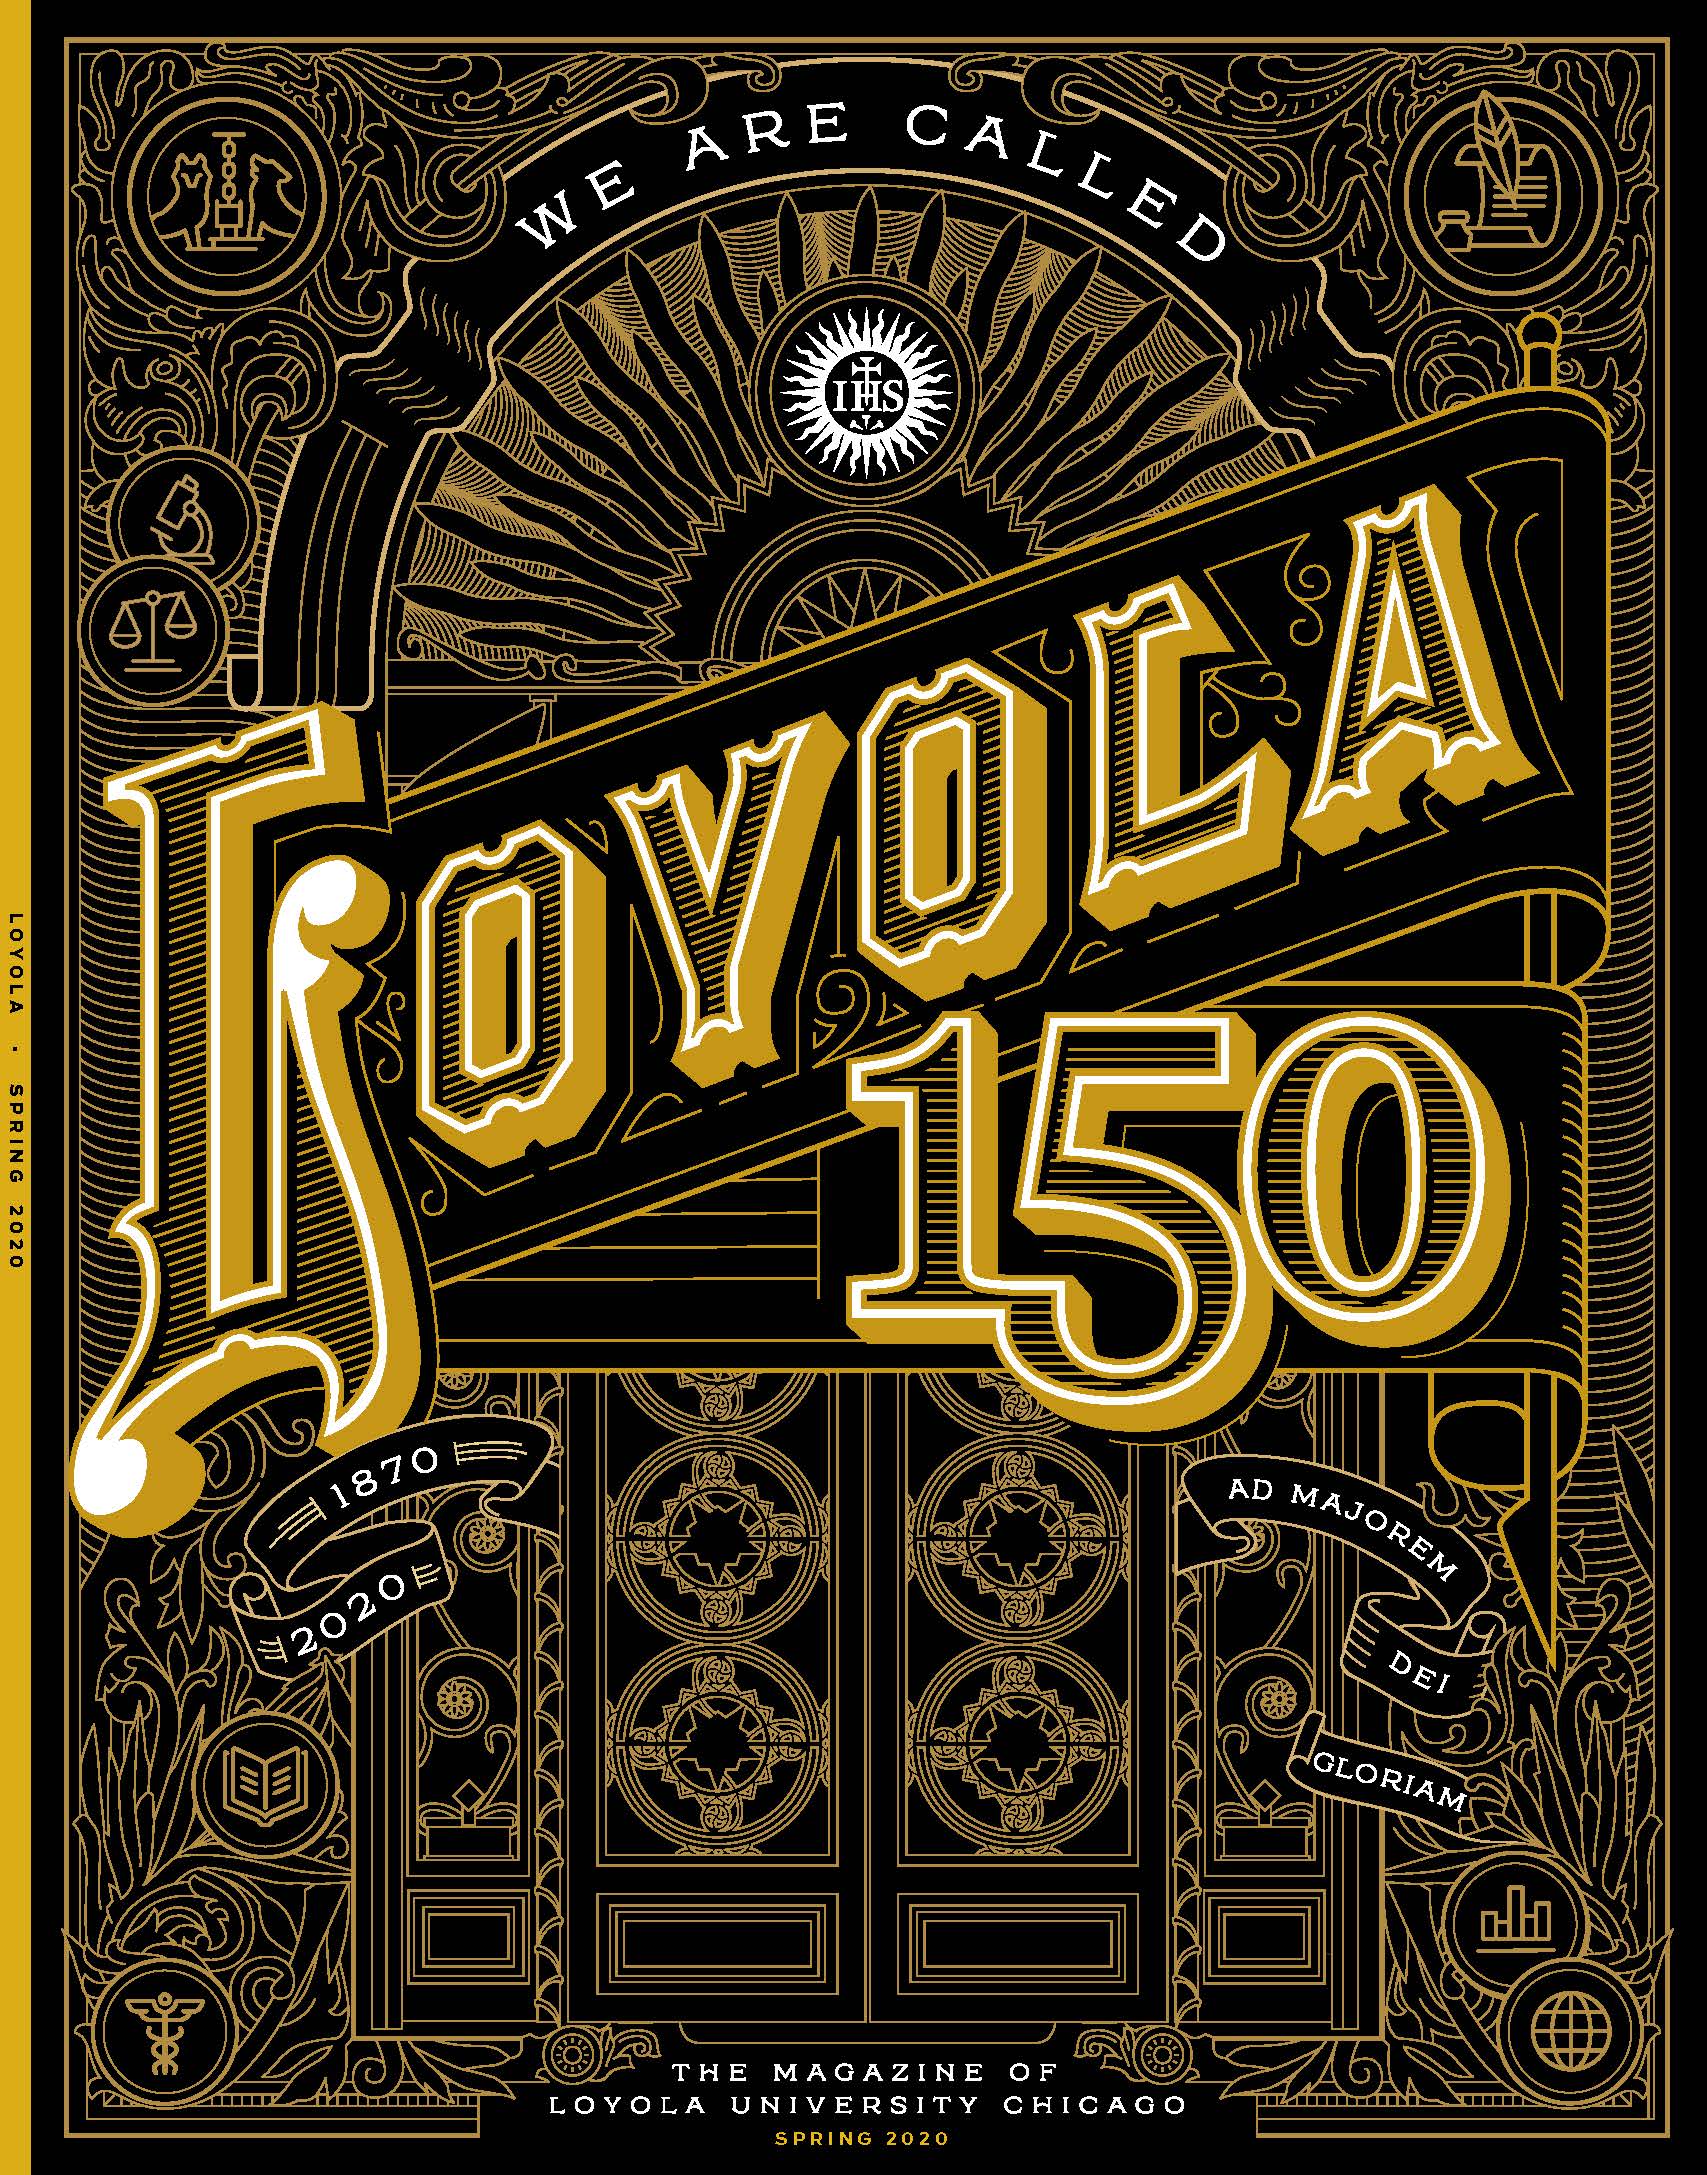 The spring 2020 issue of Loyola magazine with the text 